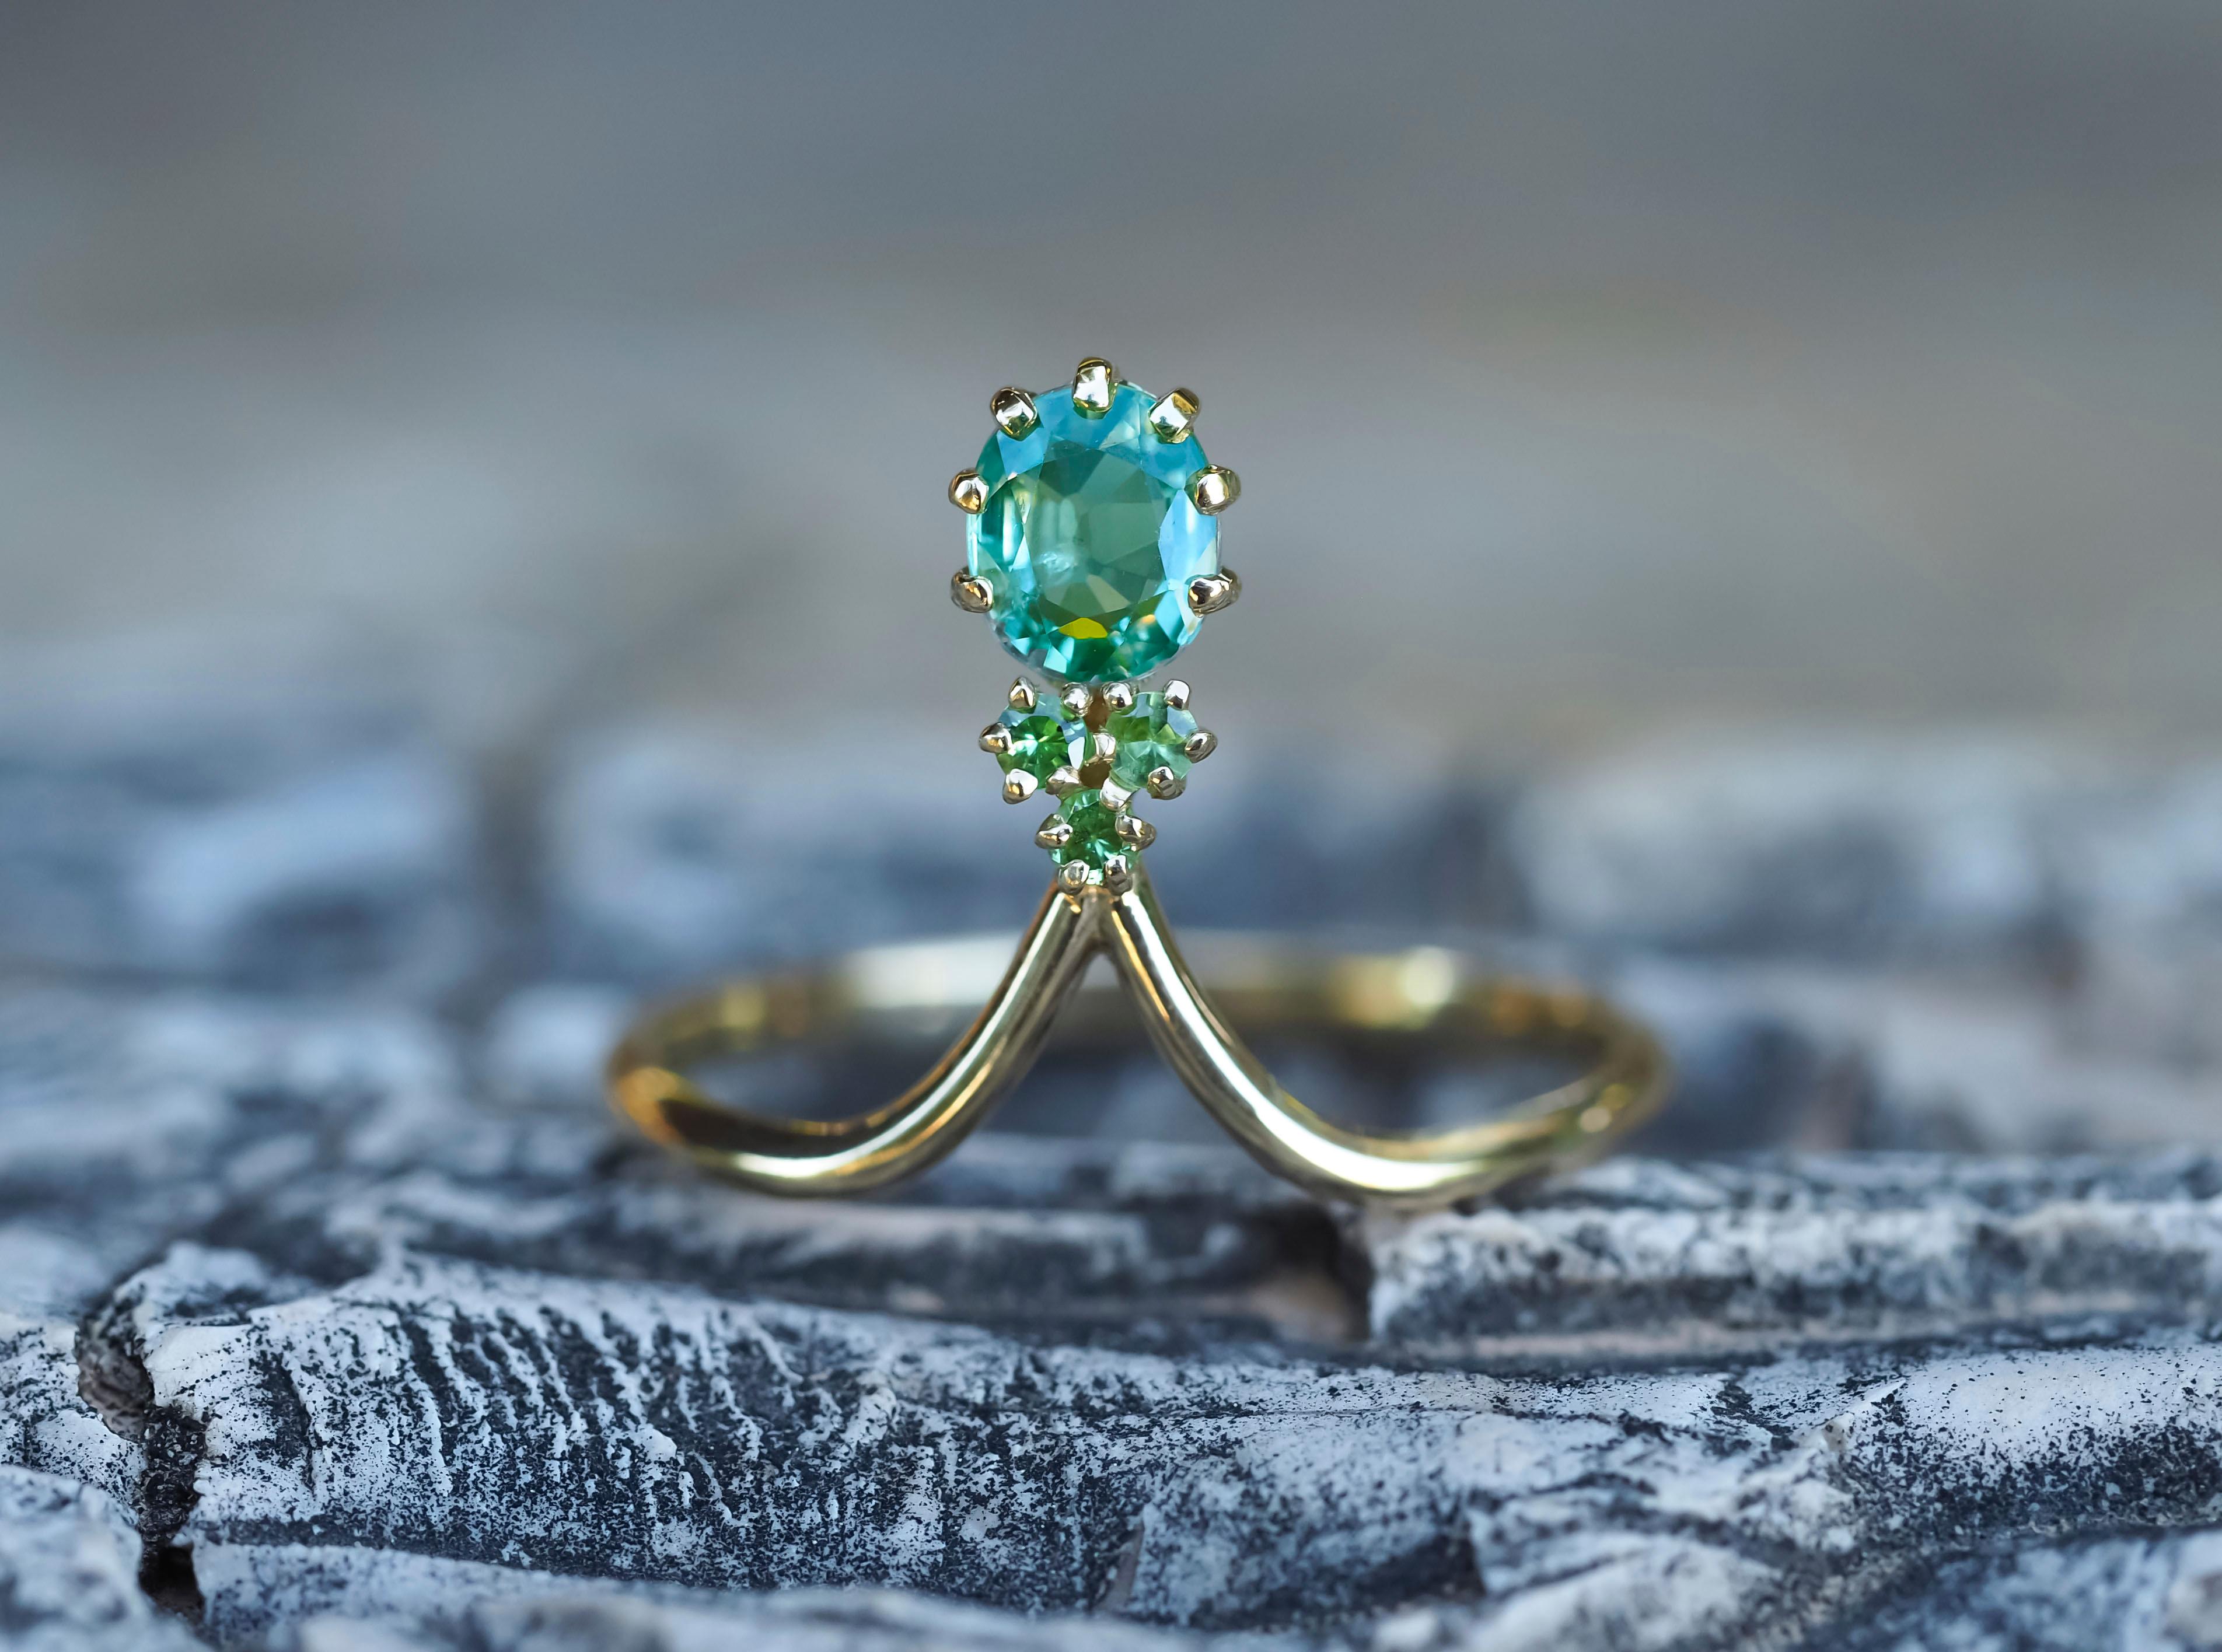 14k gold ring with sapphire and tsavorites

Metal: 14k solid gold
Total weight 1.8 gr

Sapphire
Oval cut, 0.8 ct, transparent, bluish green color. 
Tsavorites (green garnet)
Round cut, transparent, green color., 3x0.05 =0.15 ct 

auct